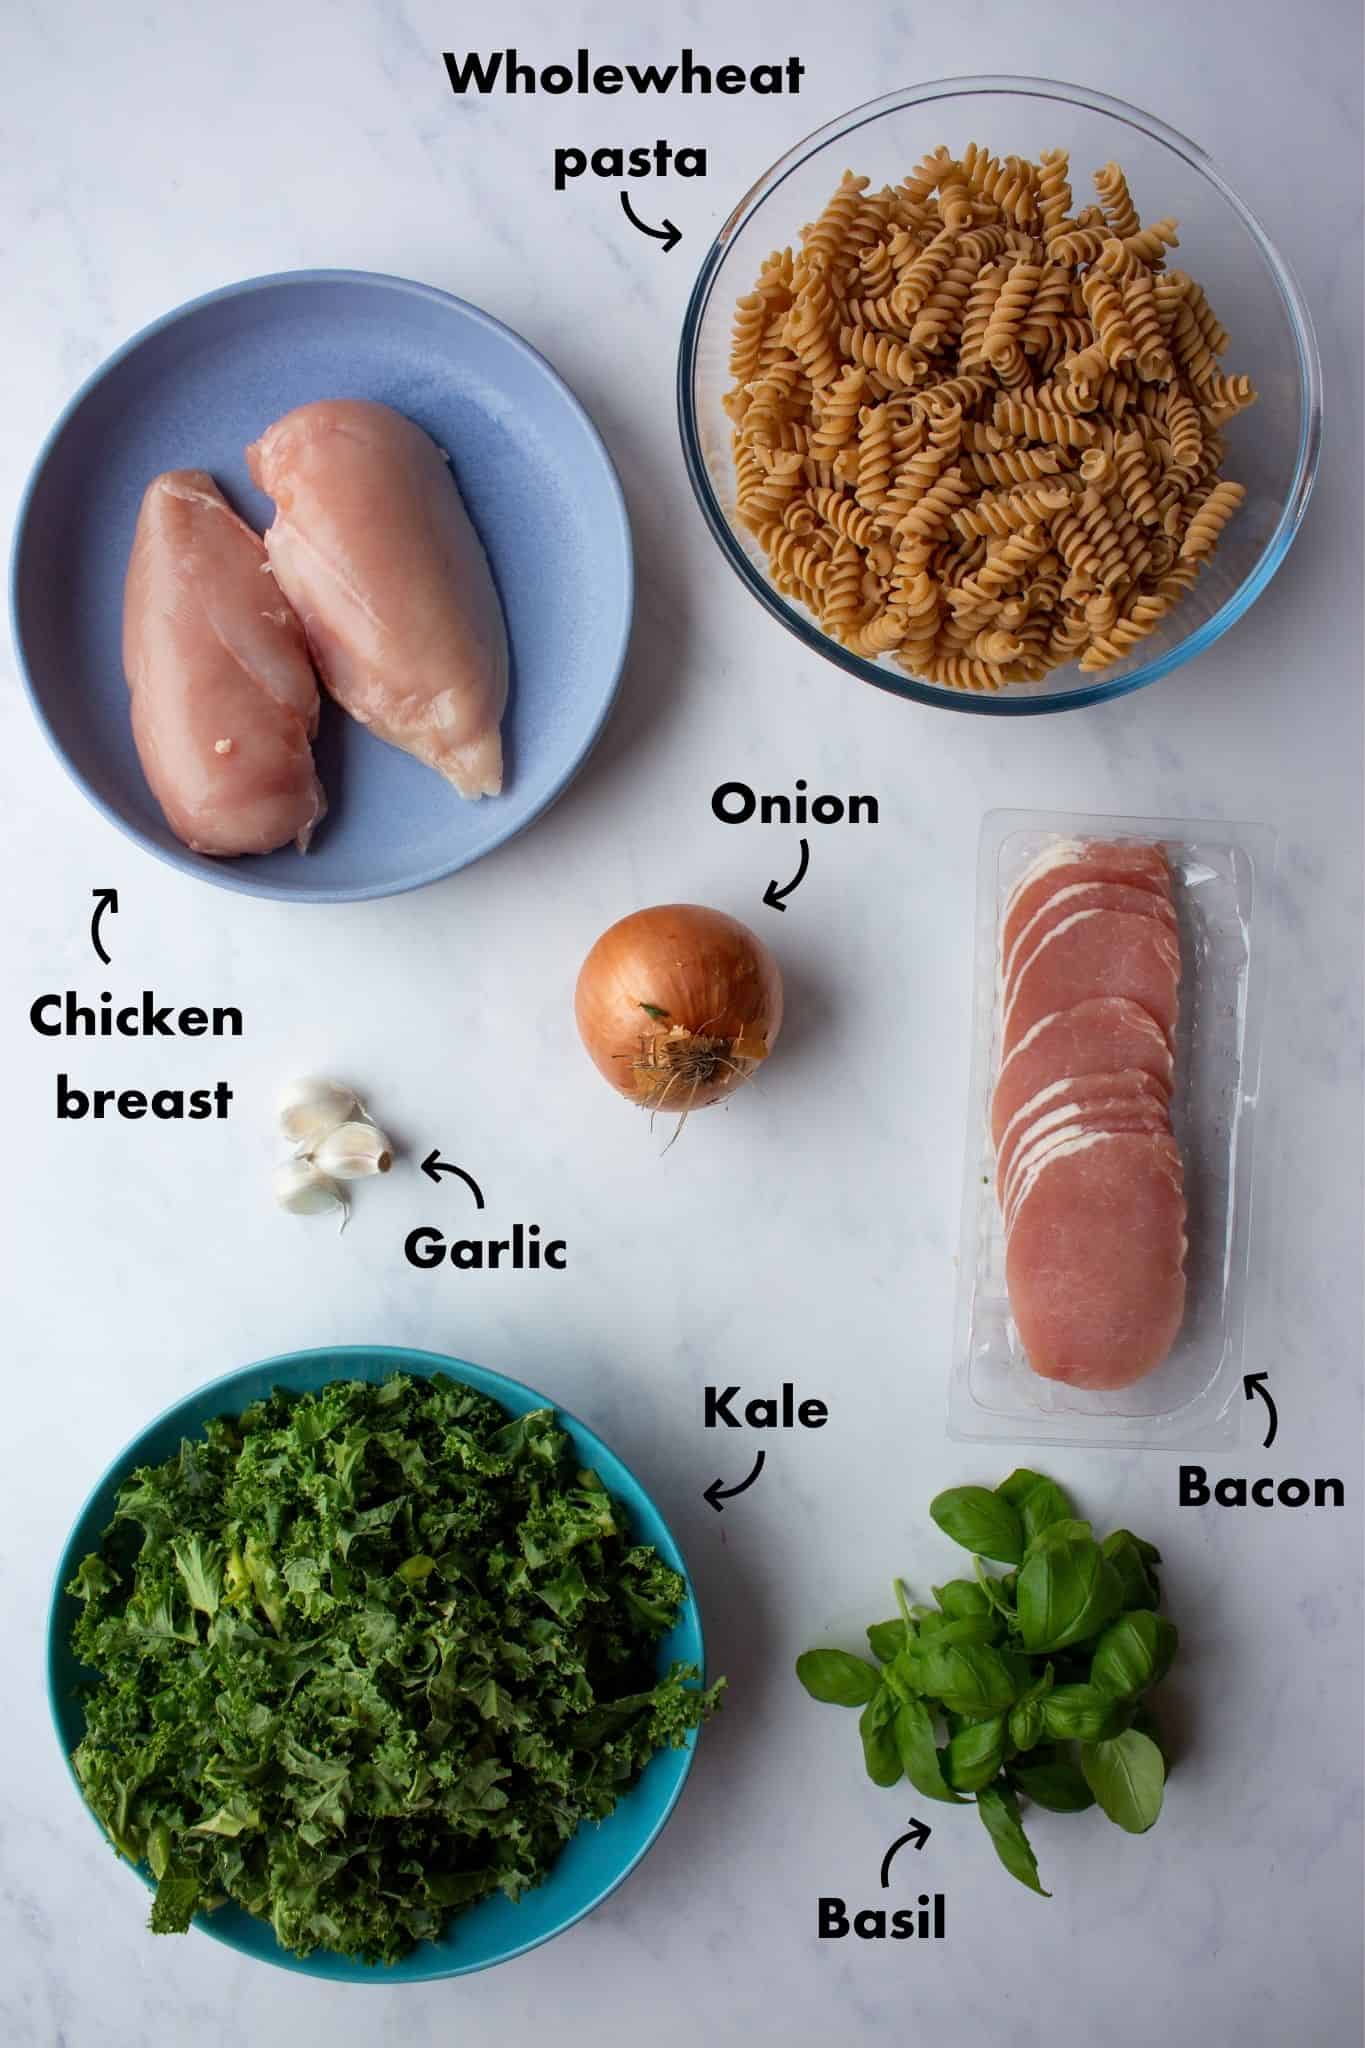 Ingredients to make creamy chicken and bacon pasta laid out on a grey background and labelled.